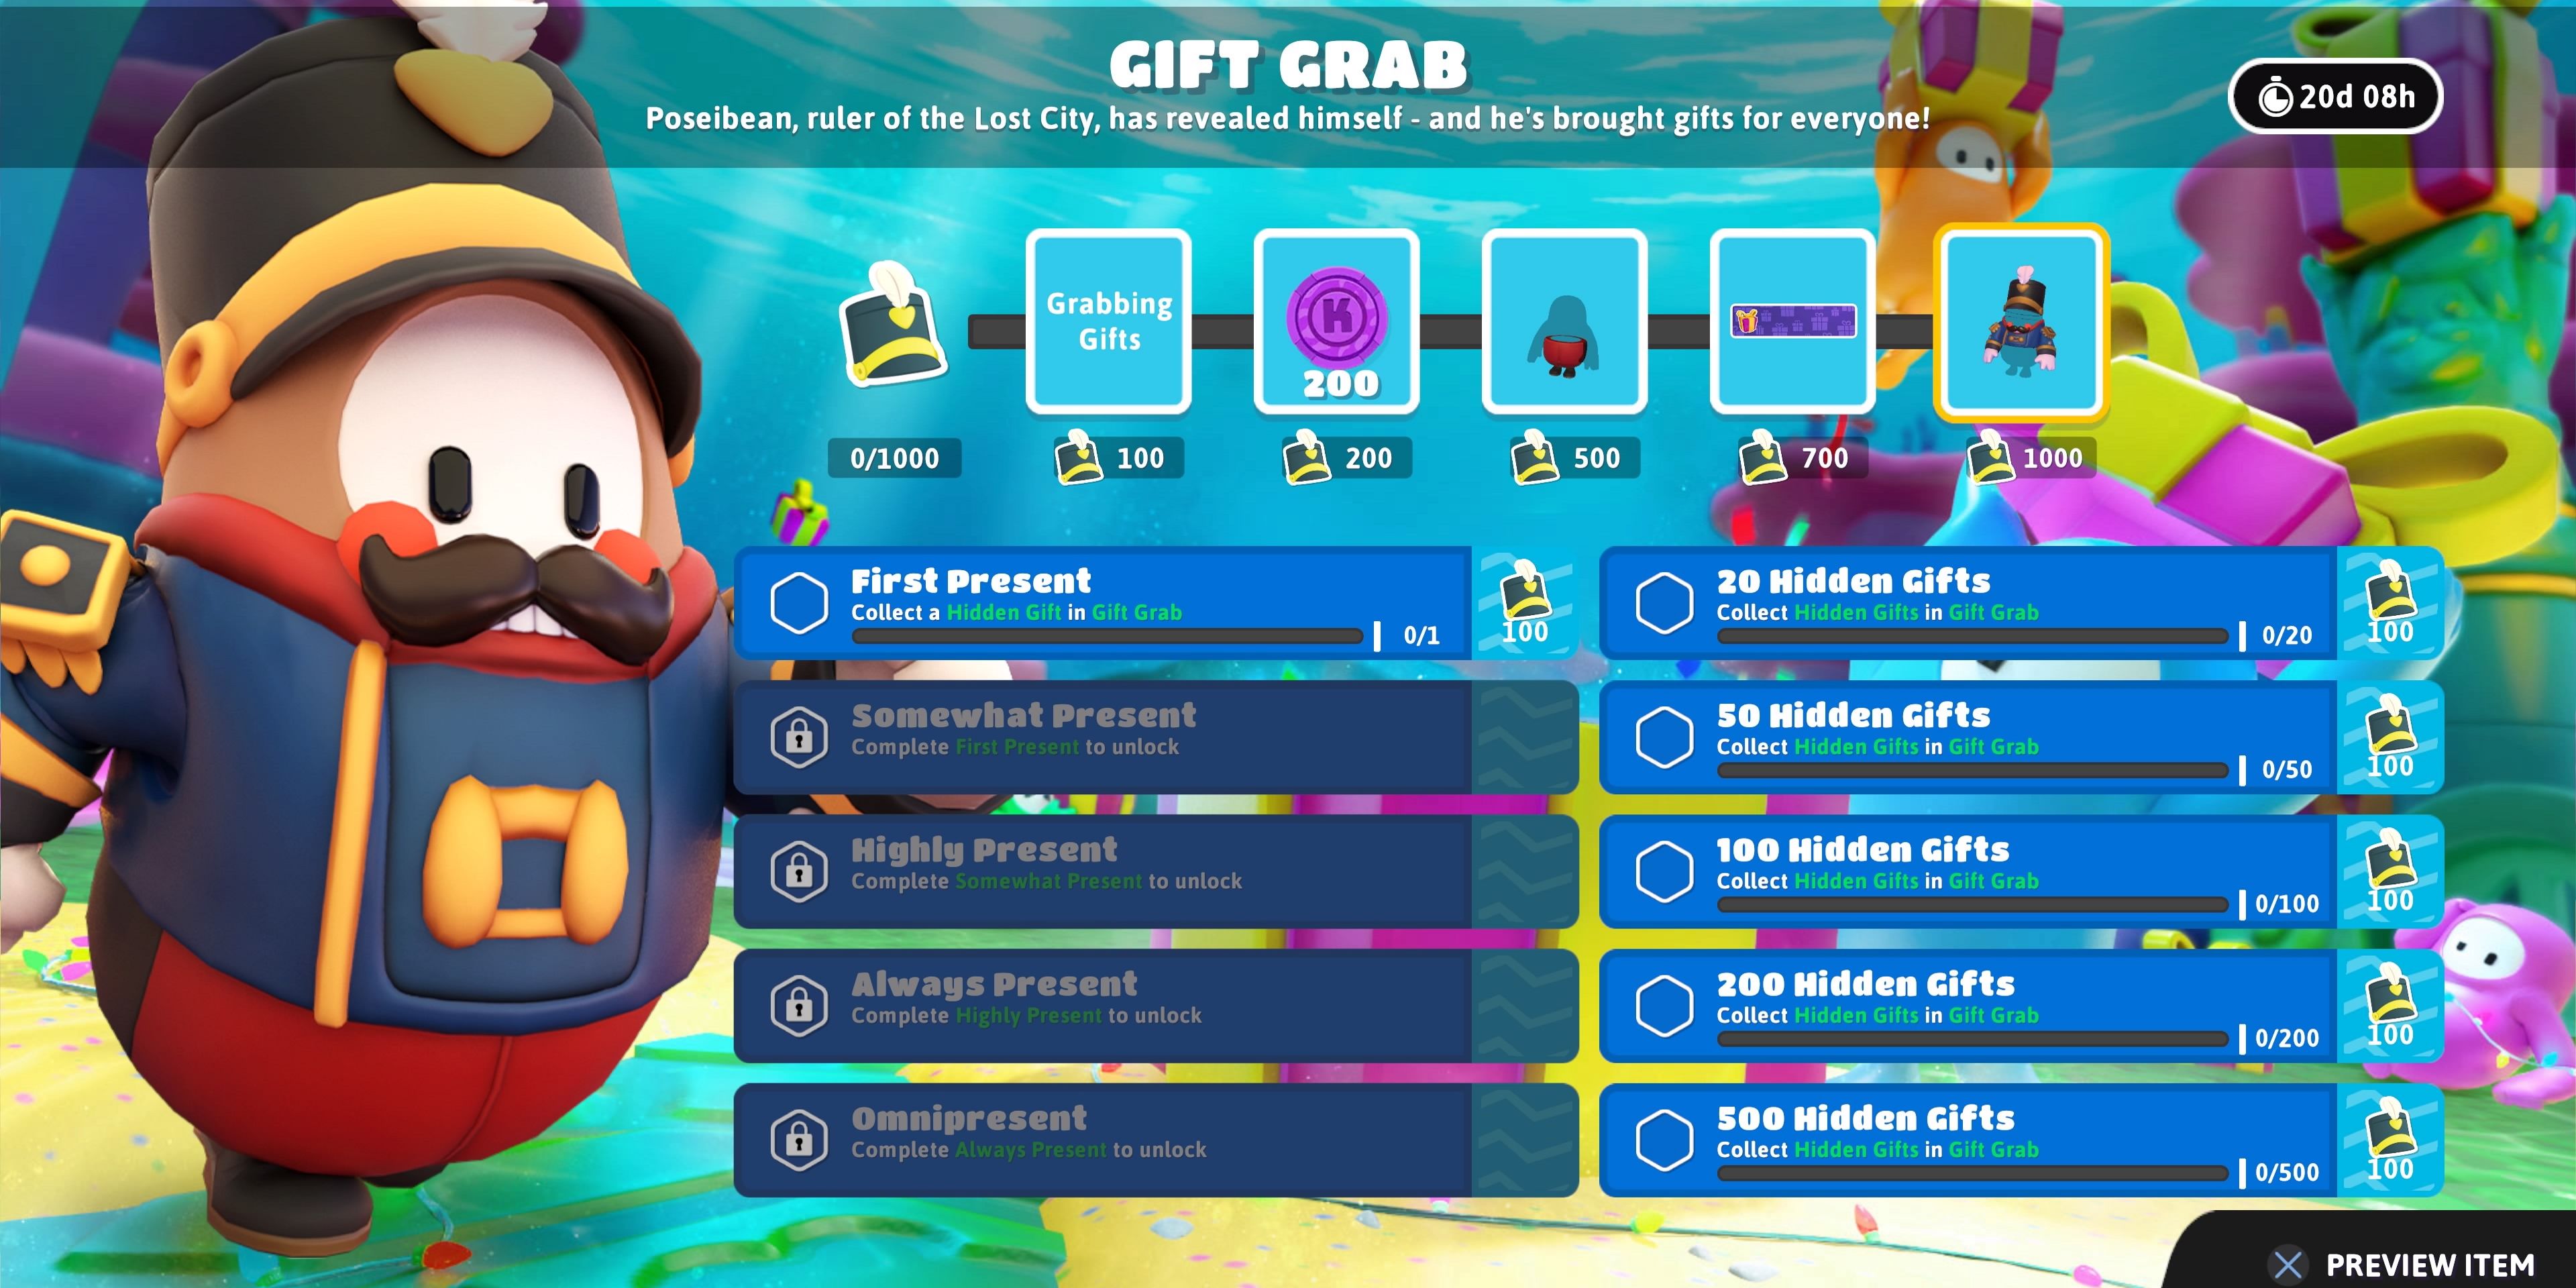 Fall Guys Gift Grab Event page showing all event missions and rewards